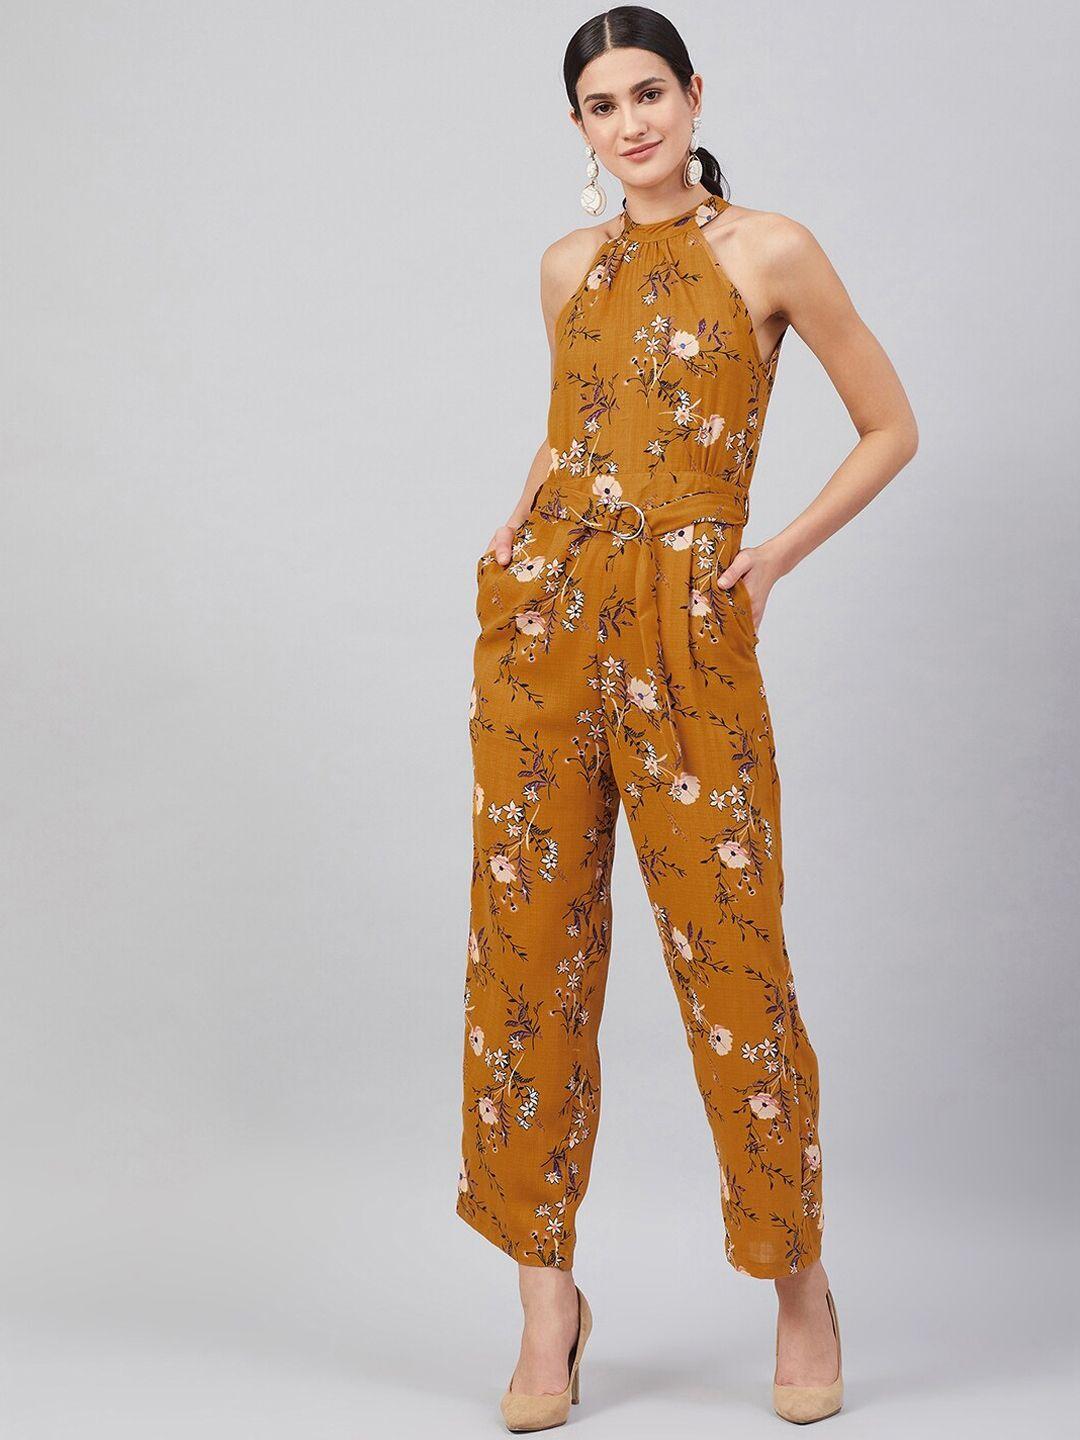 marie claire women mustard yellow & pink floral printed basic jumpsuit